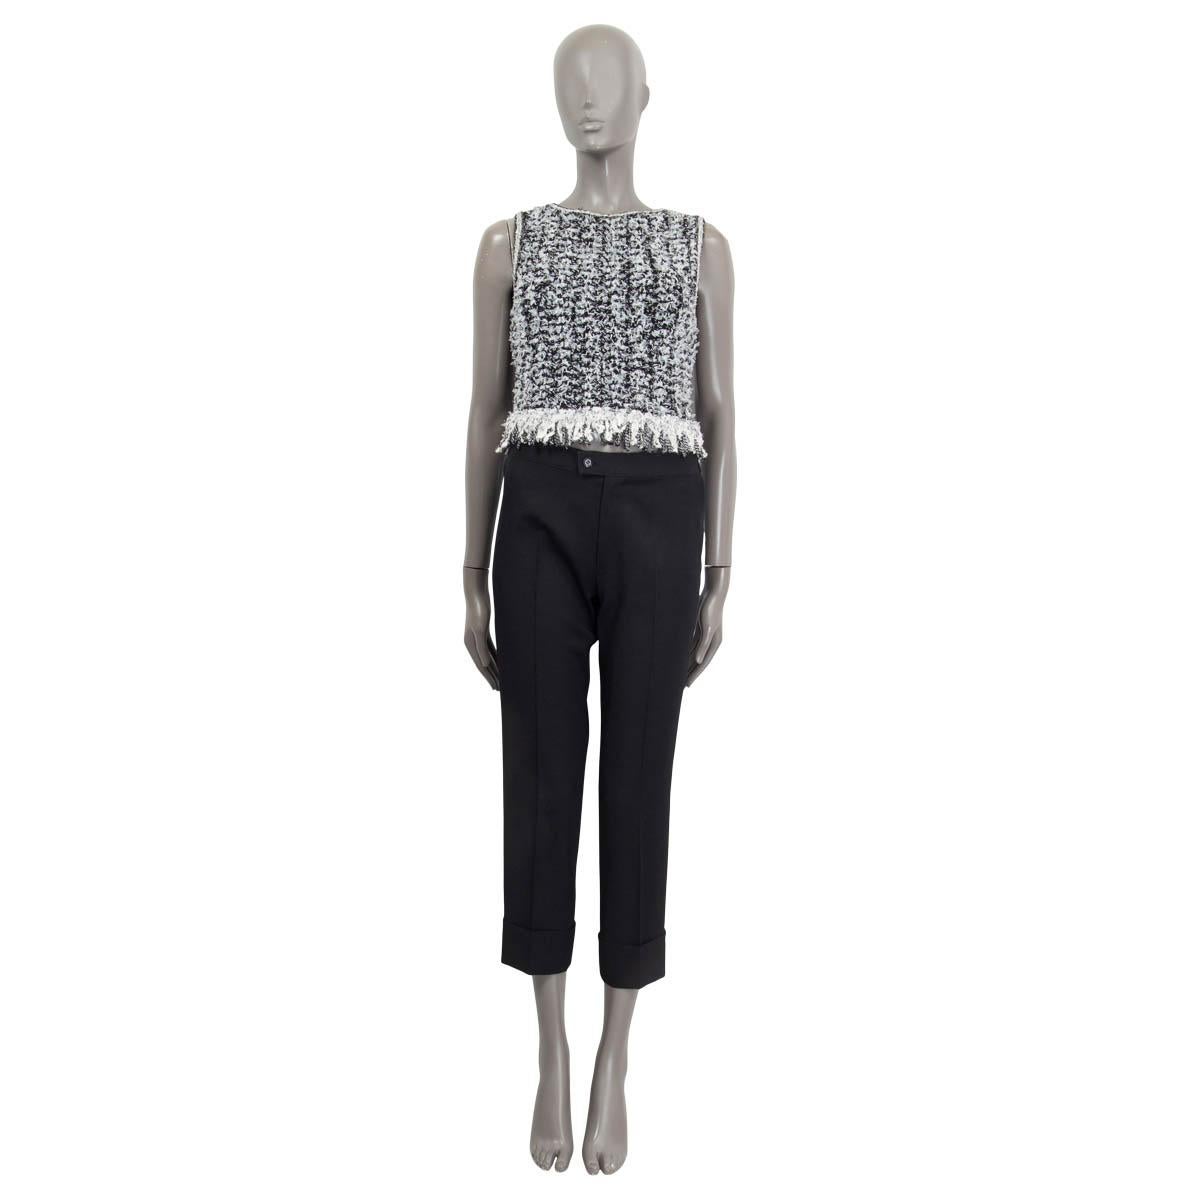 100% authentic Chanel cropped top from Spring 2018 in black and white cotton (67%), polyamide (15%), viscose (9%), silk (9%). Features fringes all over. Finished off with knotted fringes at the hemline and a CC-logo at the front. Has been worn and